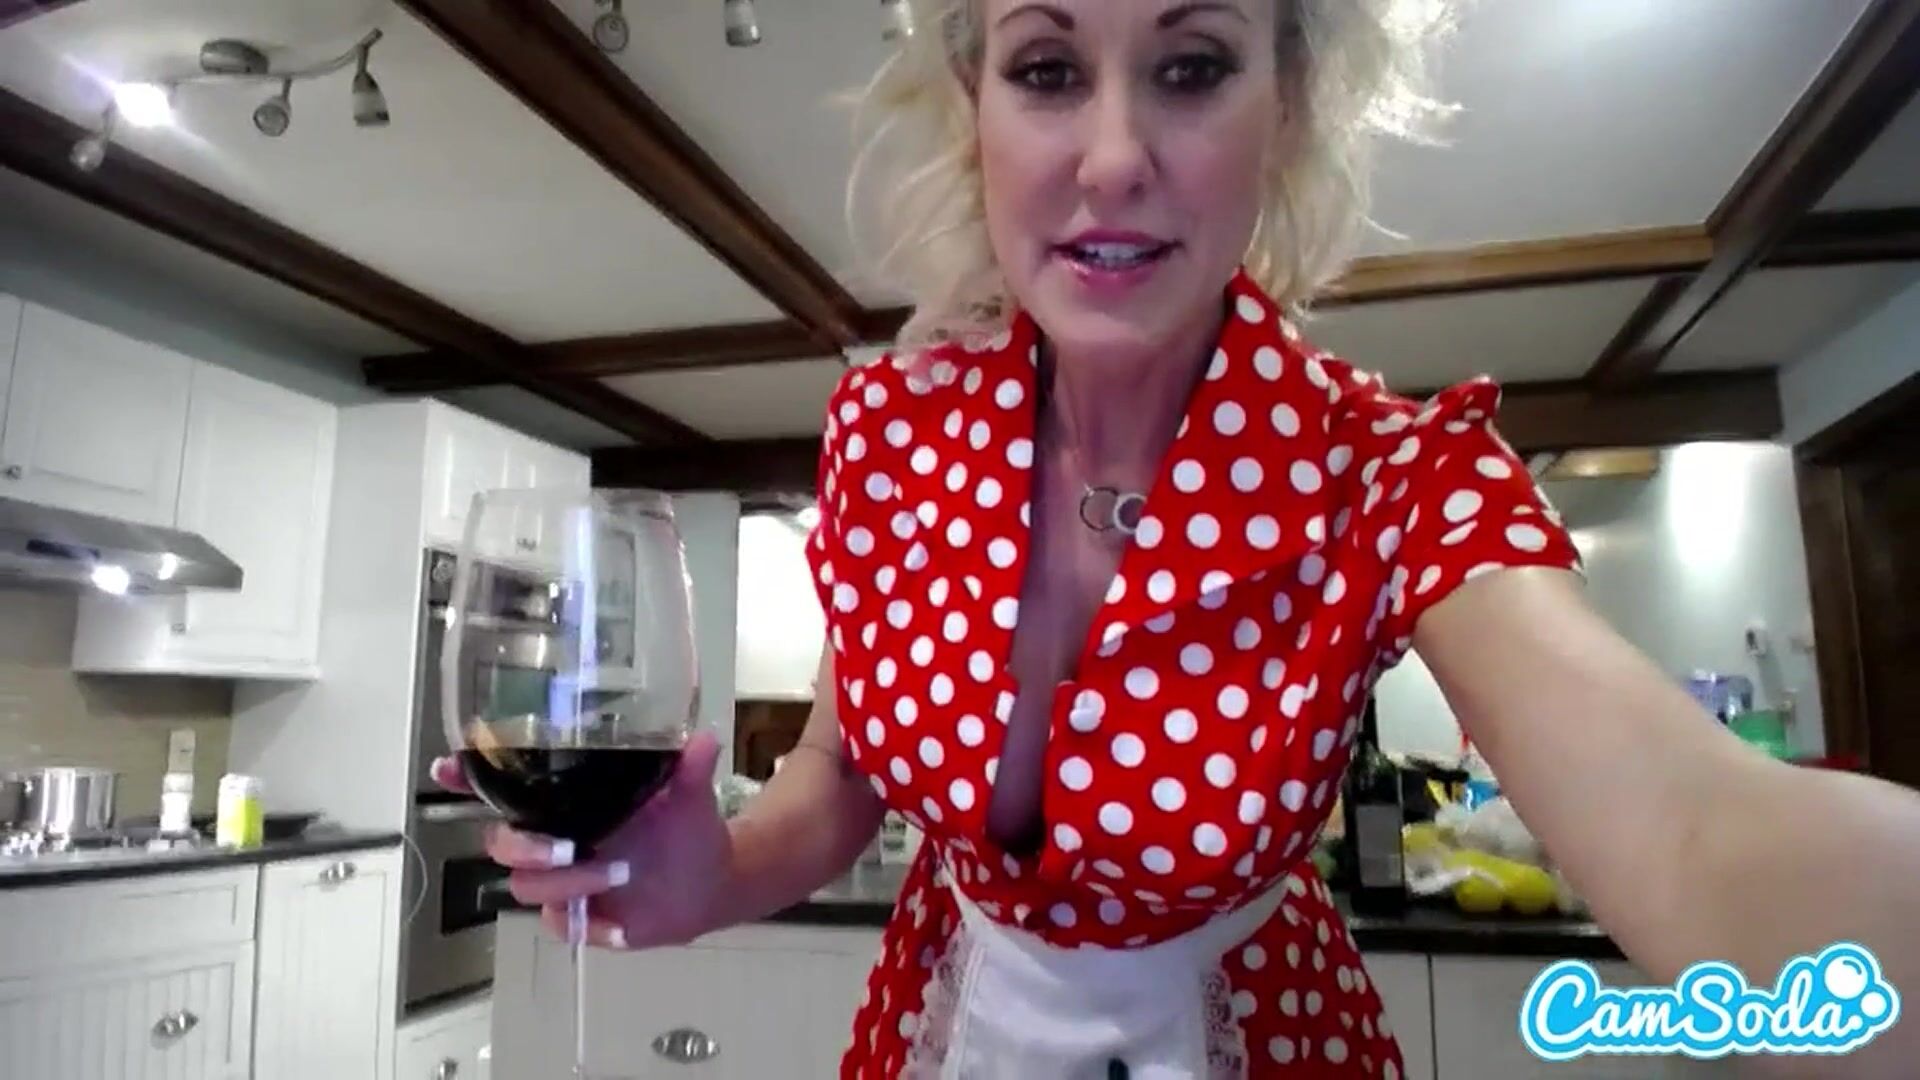 Queen MILF Brandi Love Shows Us How To Have Fun In The Kitchen!